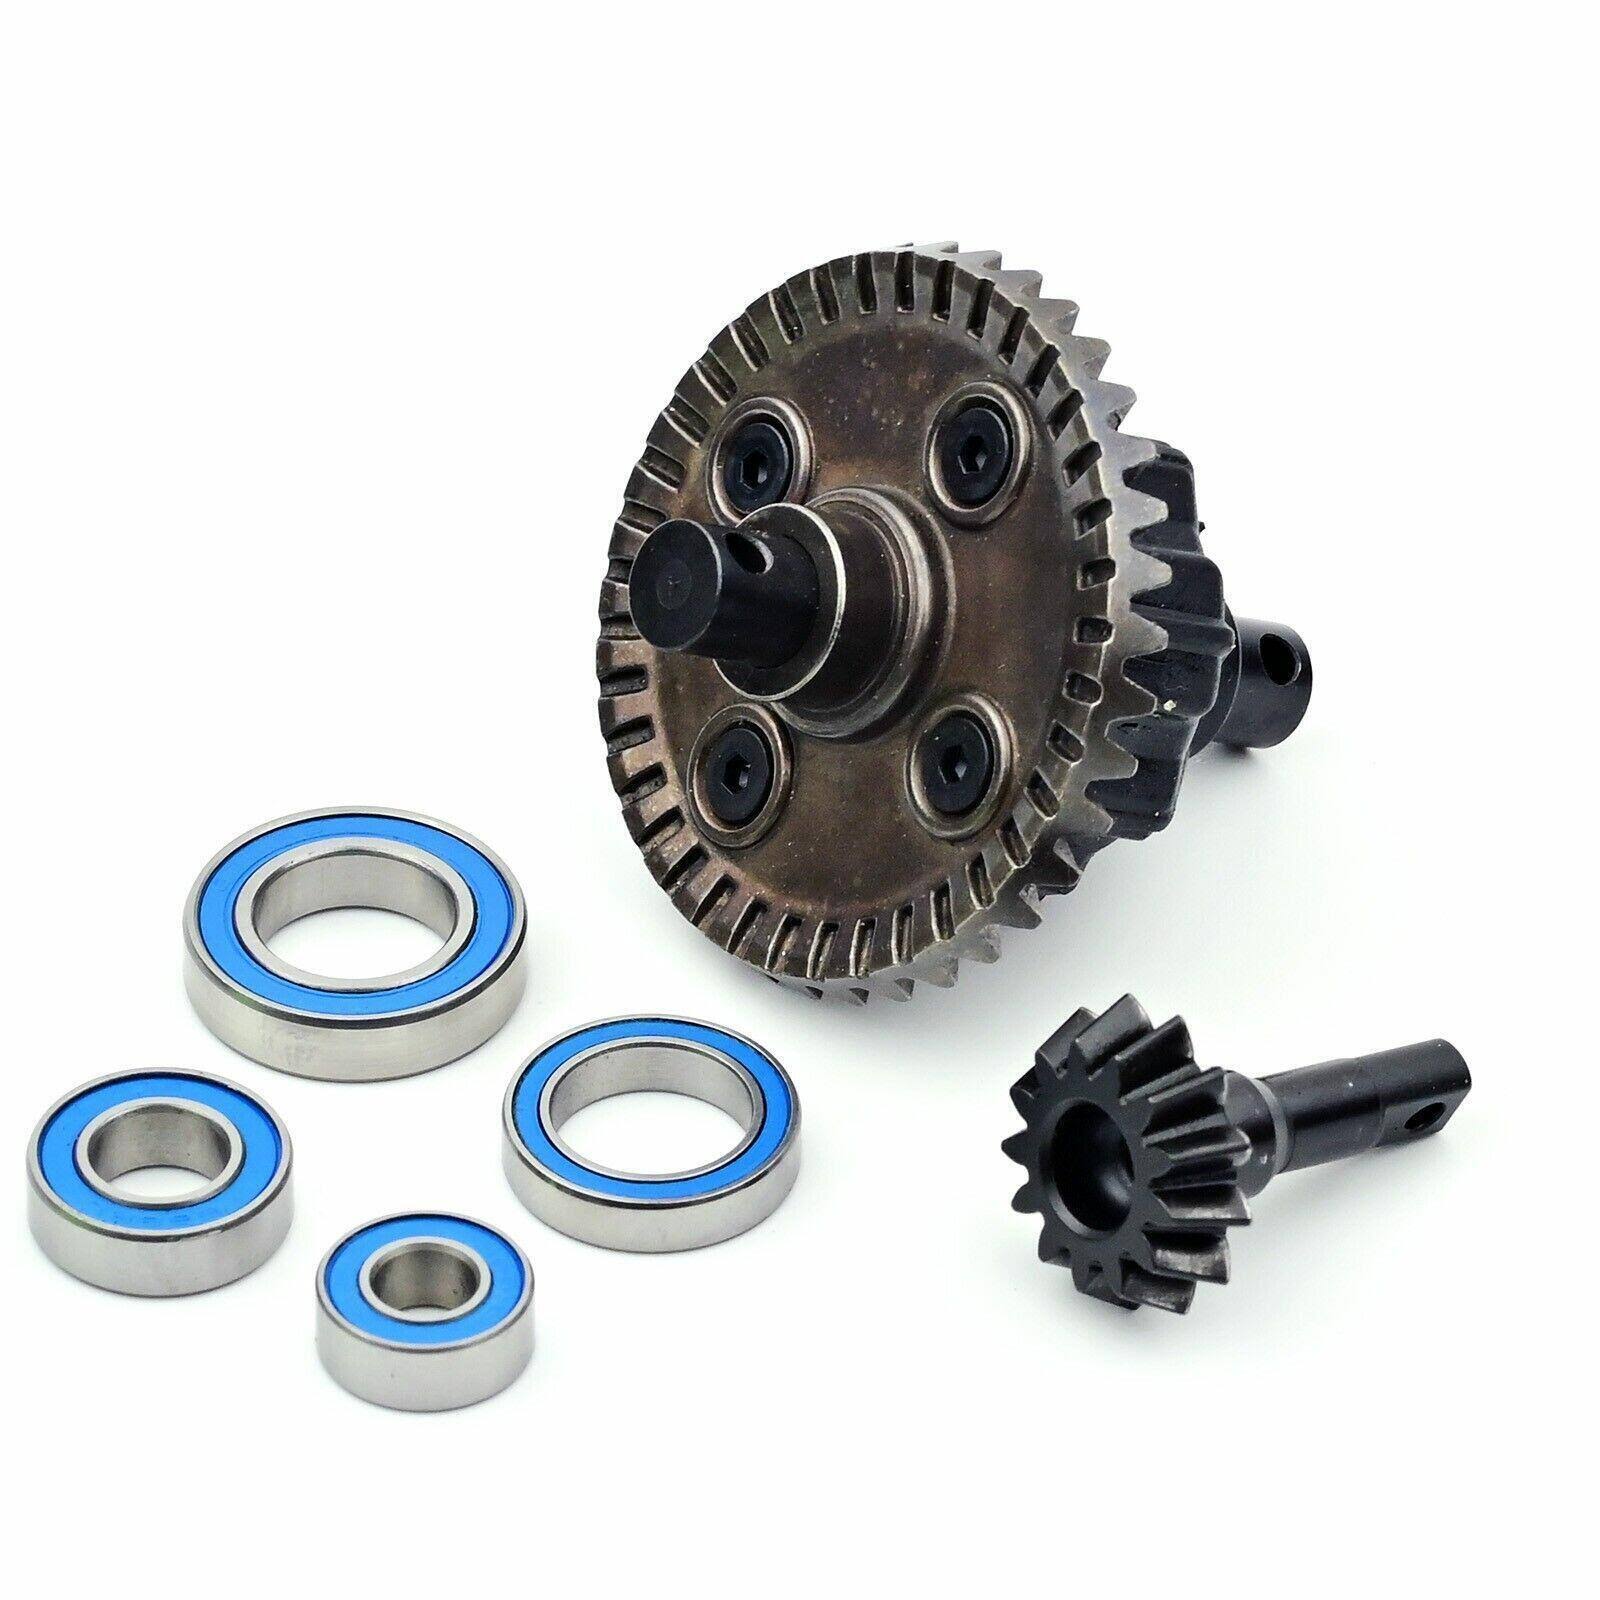 Traxxas 8686 Differential, Front or Rear, Complete Fits E-Revo Vxl